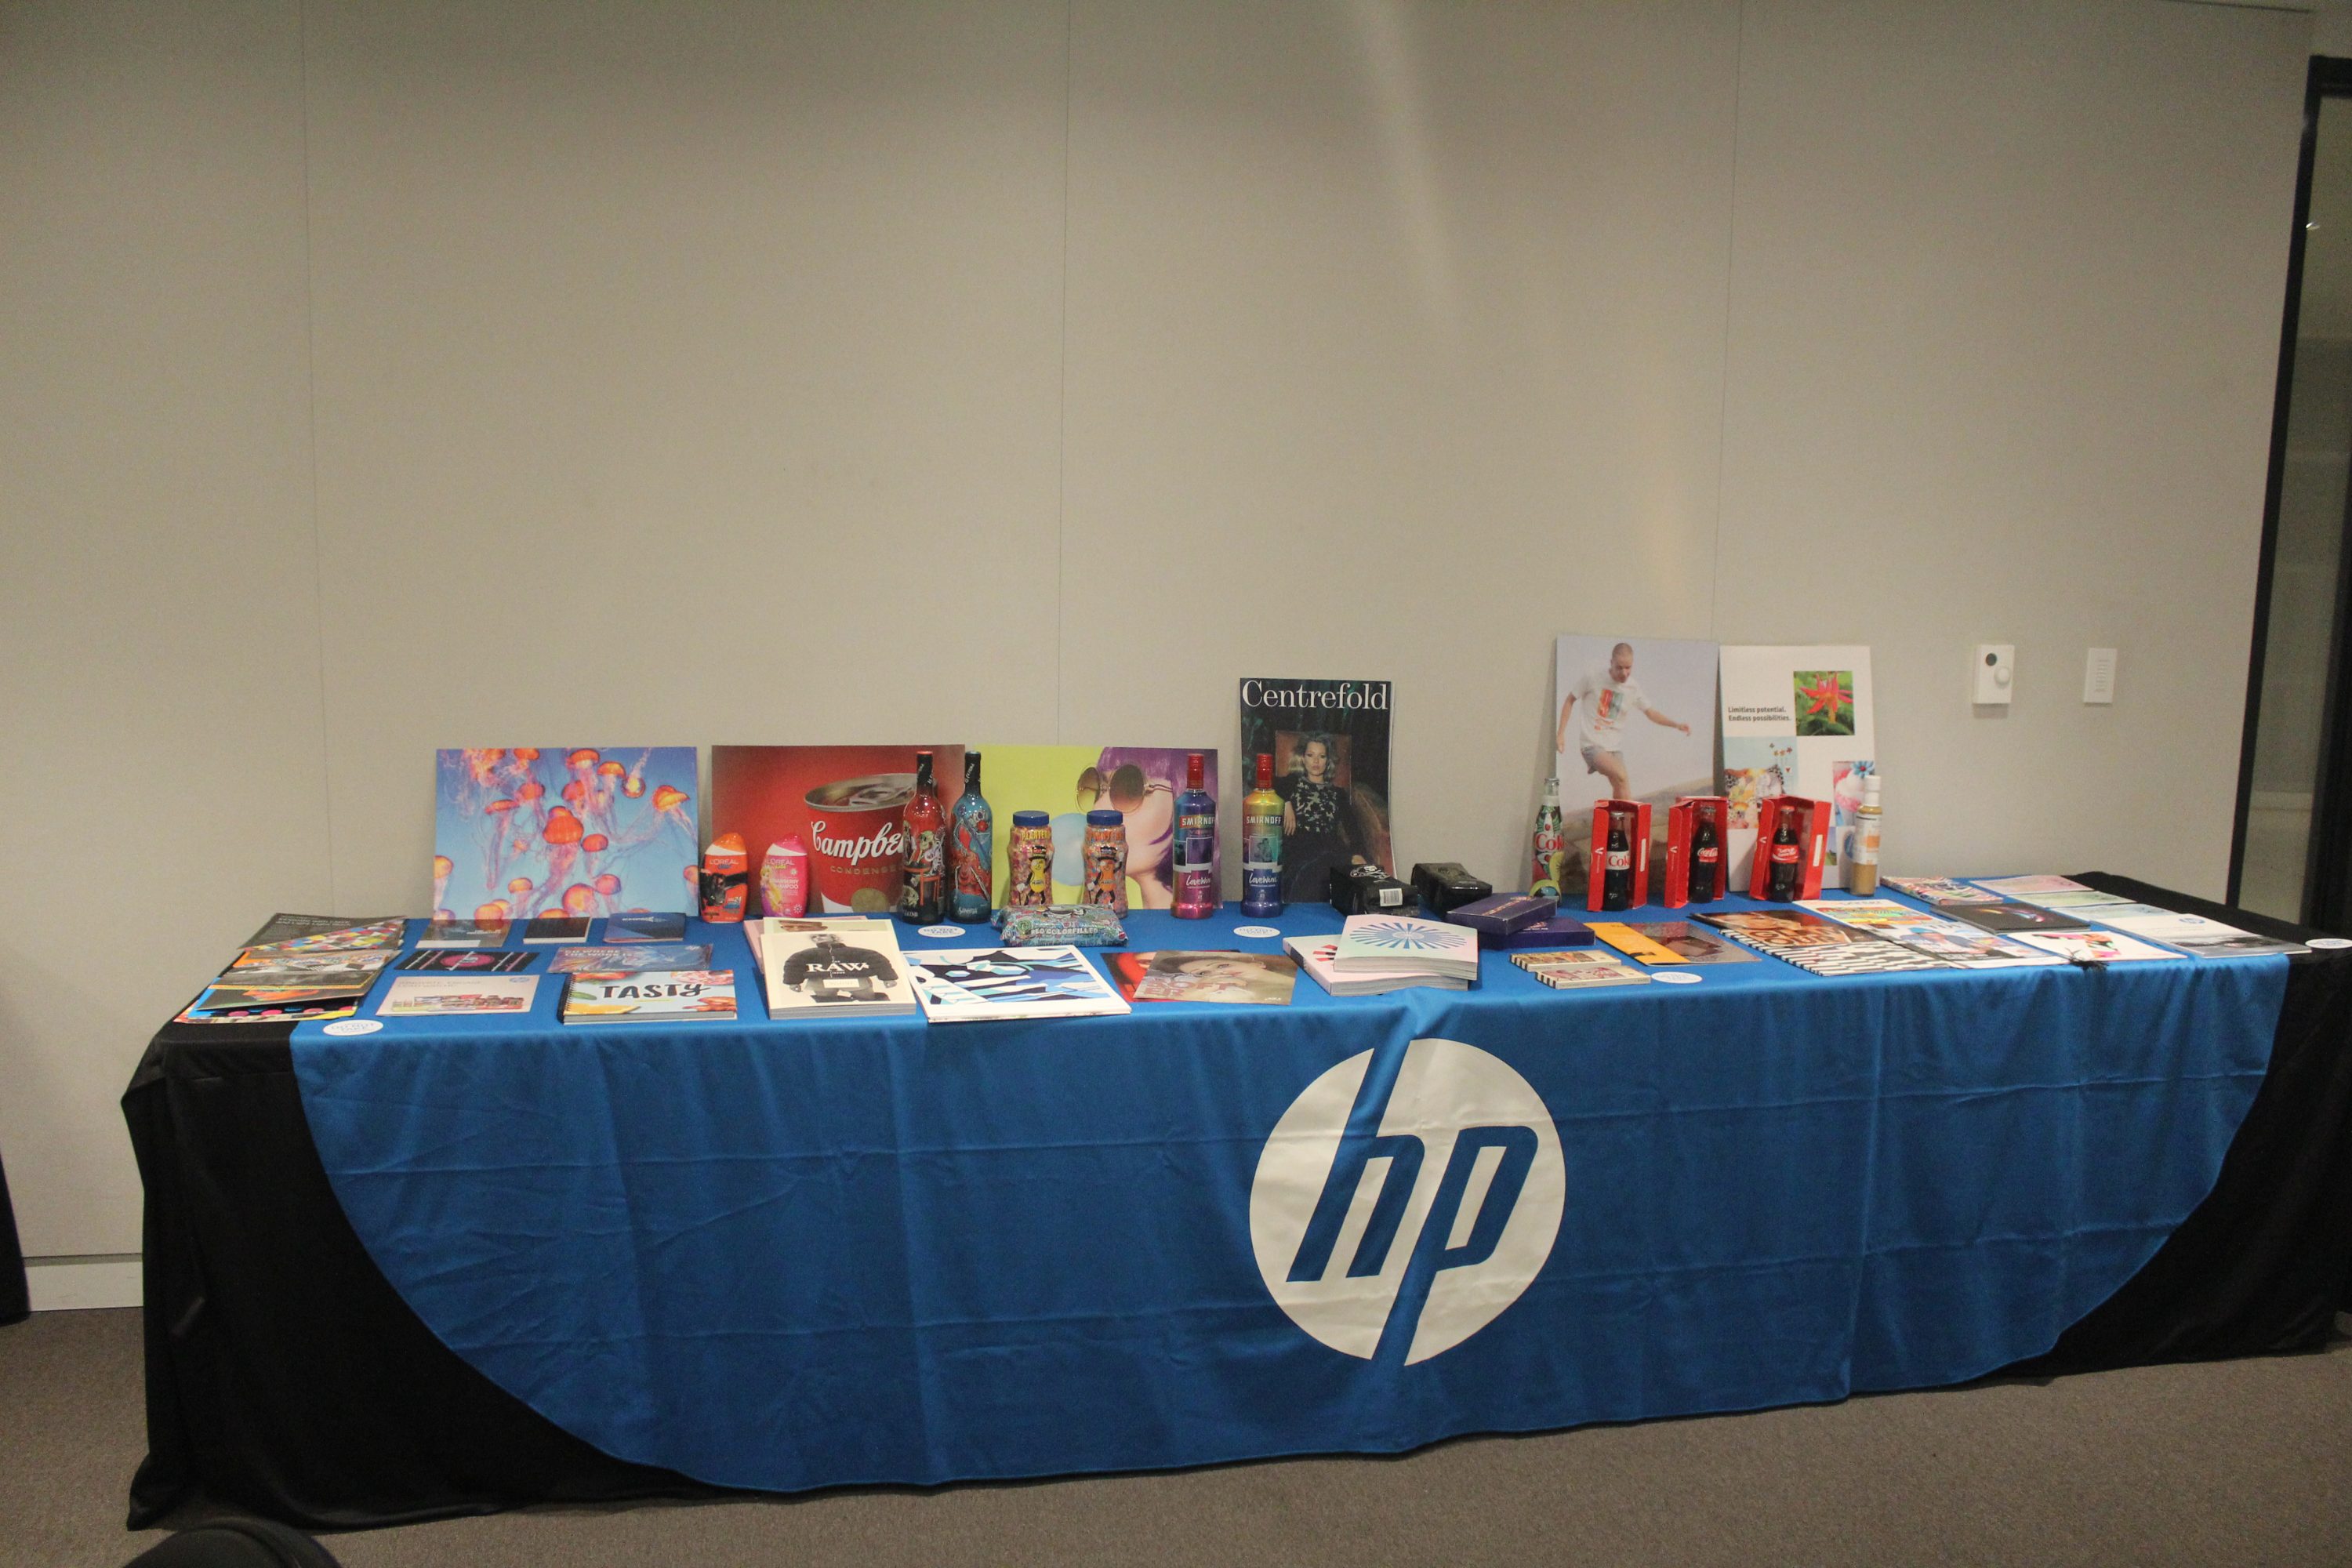 HP sponsored the Live & Local event series.